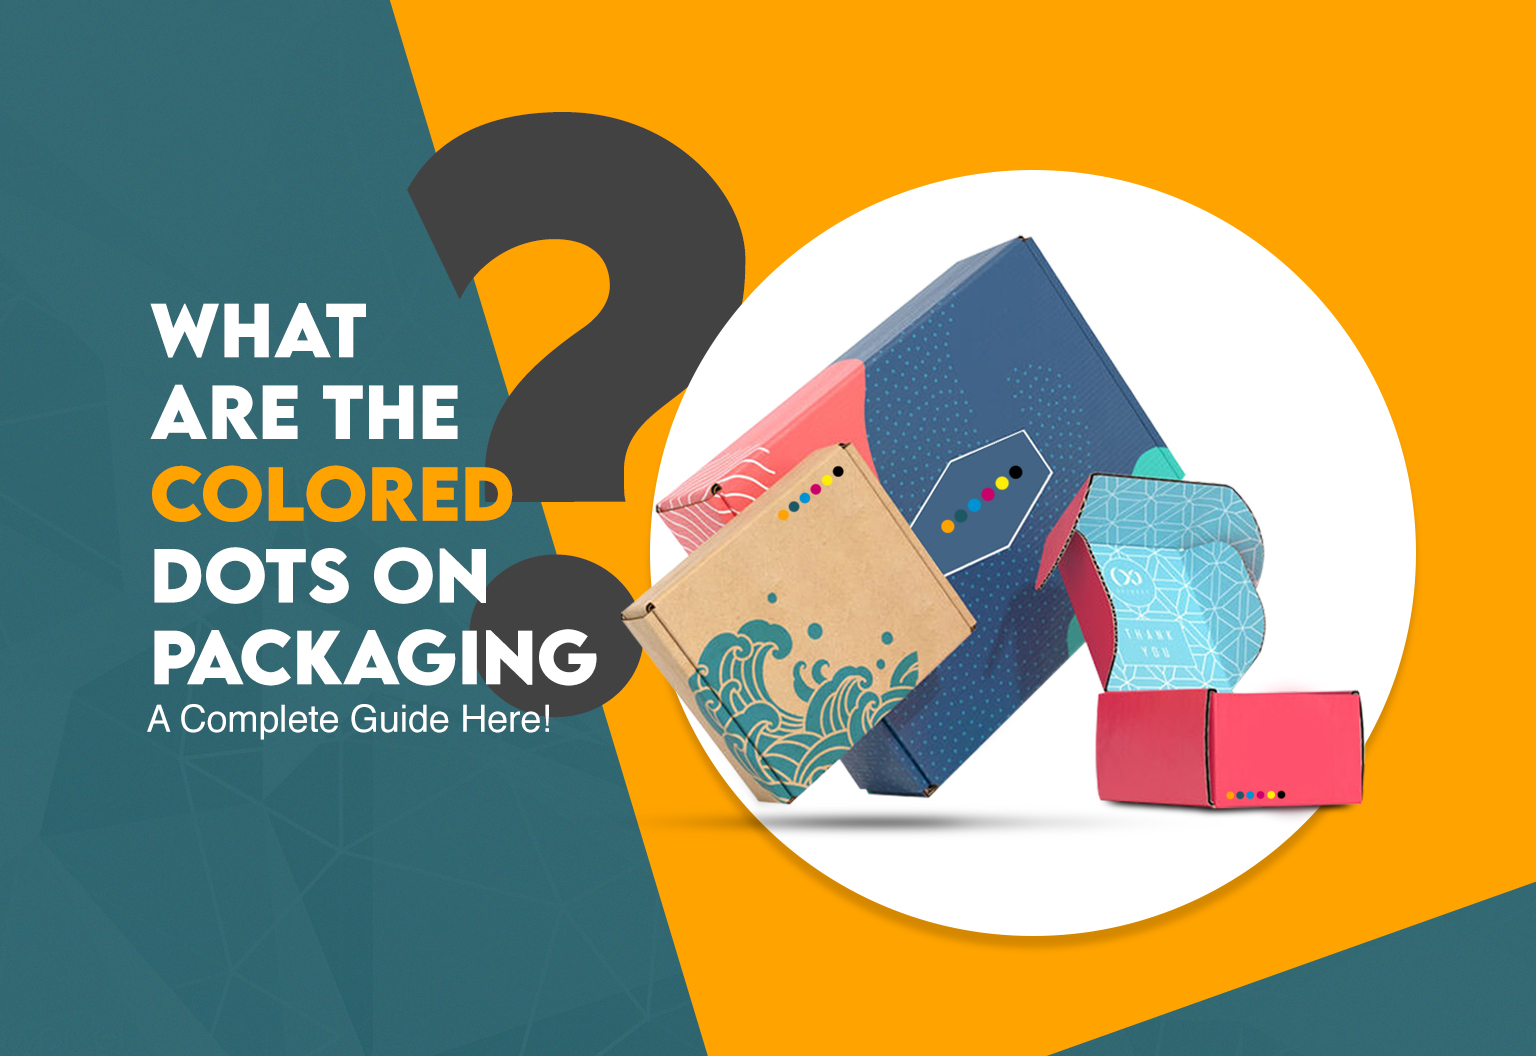 What Are the Colored Dots On Packaging? A Complete Guide Here!